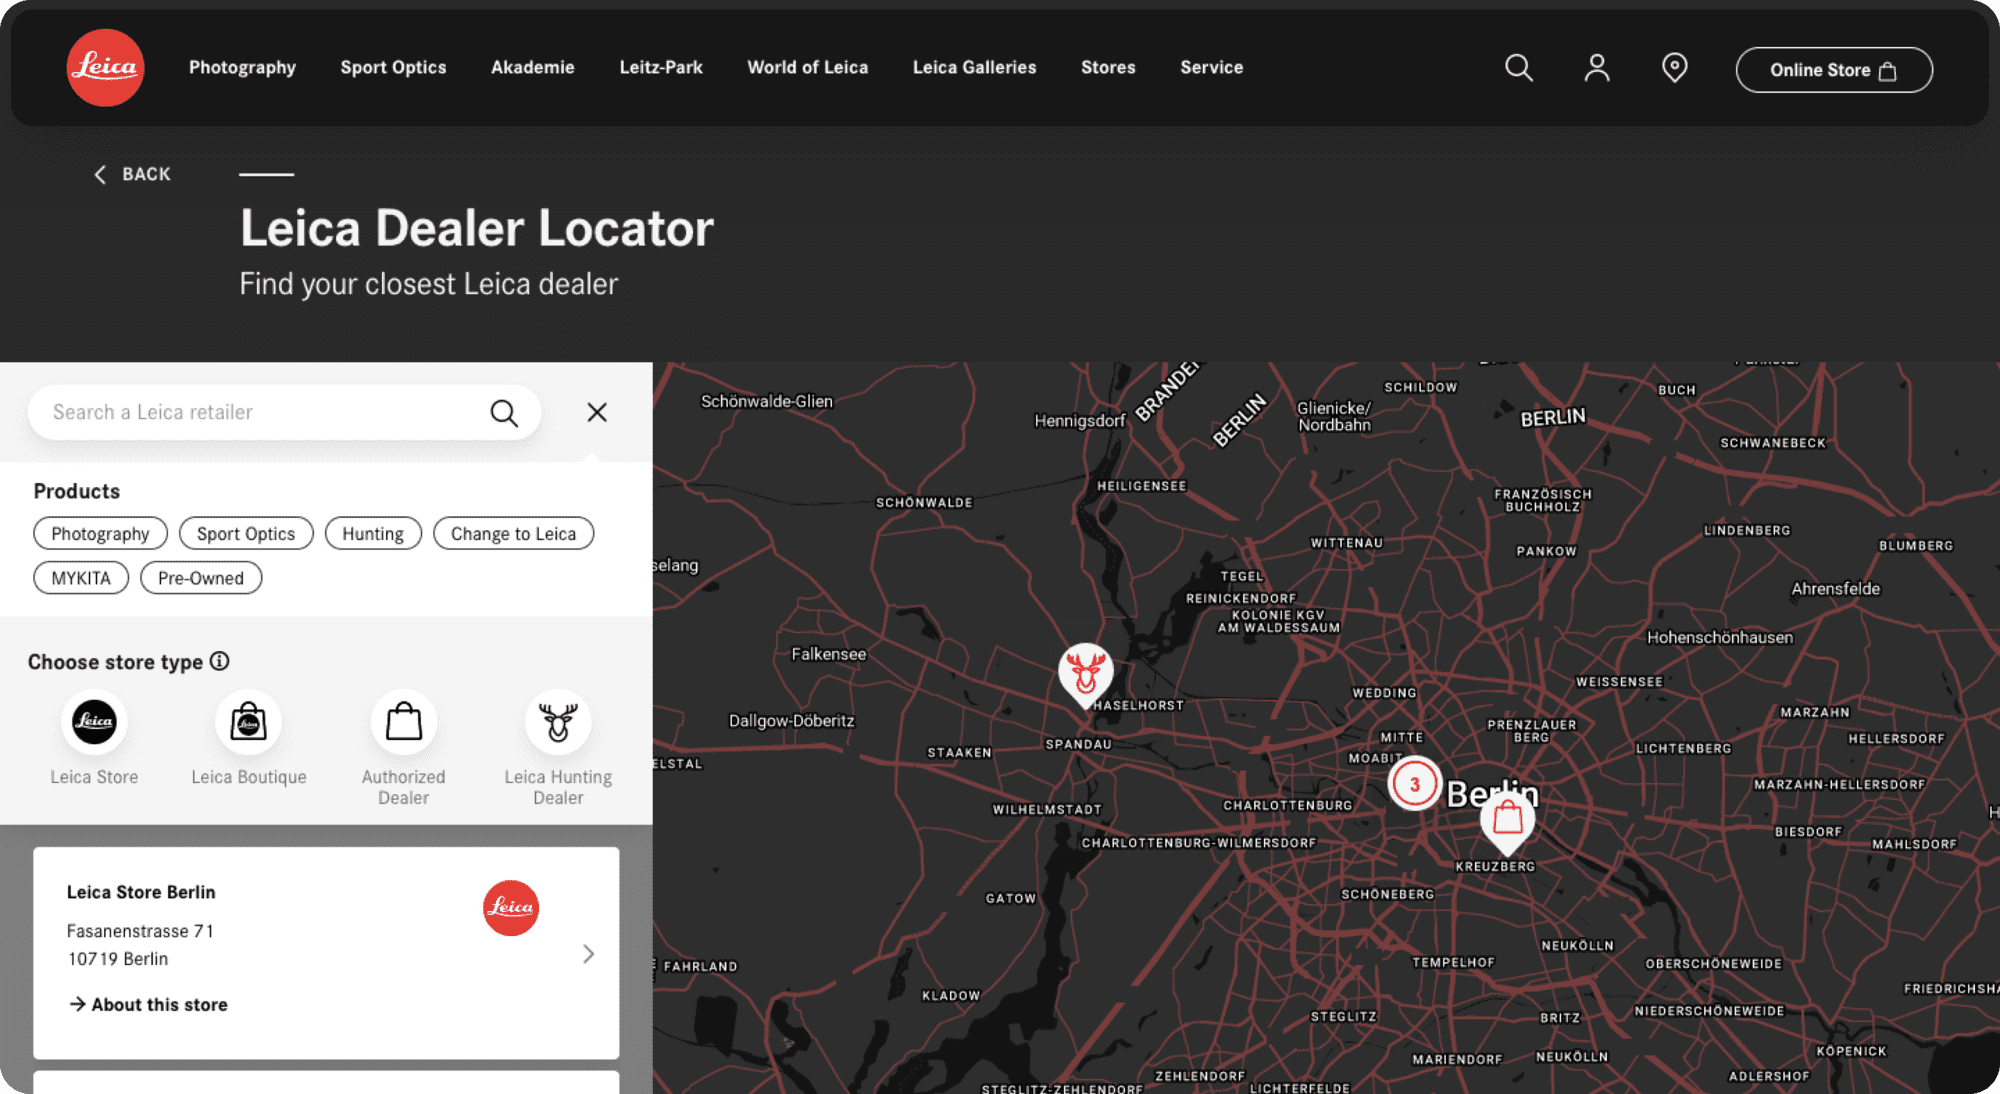 Leica English website has an interactive map on its Dealer Locator page